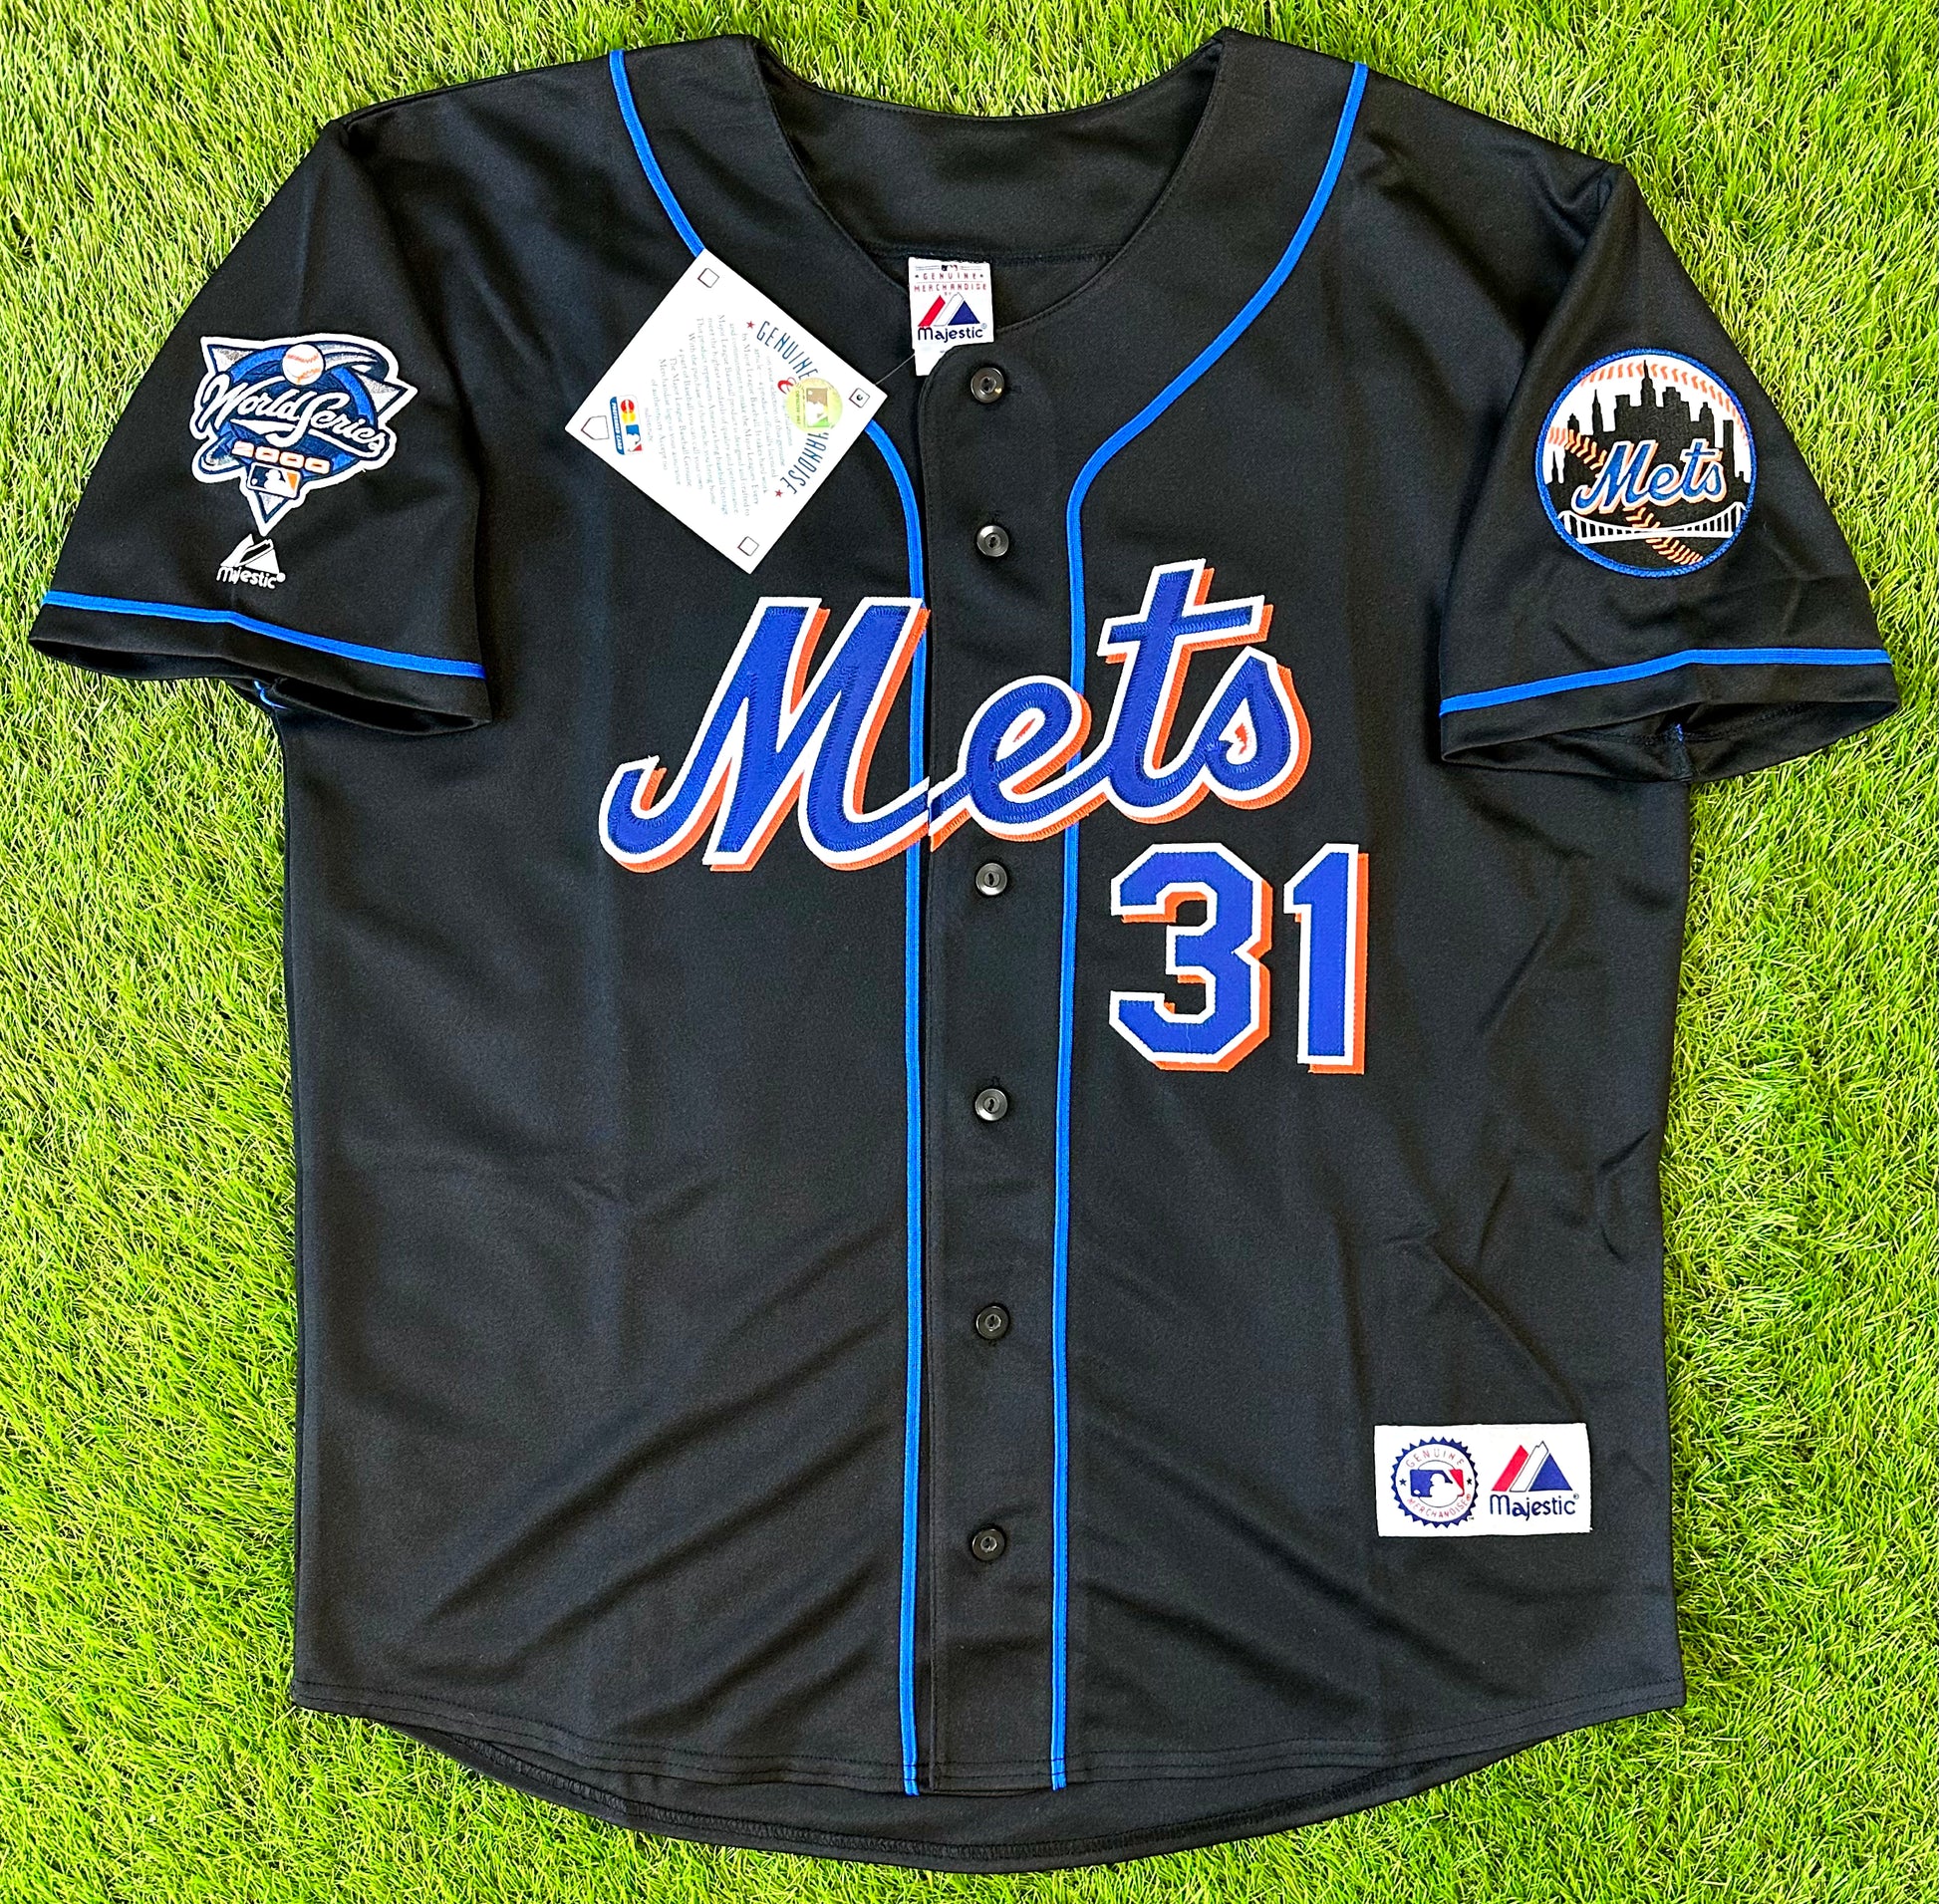 New Mike Piazza NEW YORK METS Stadium Give Away Promo Baseball Team JERSEY  Sz XL